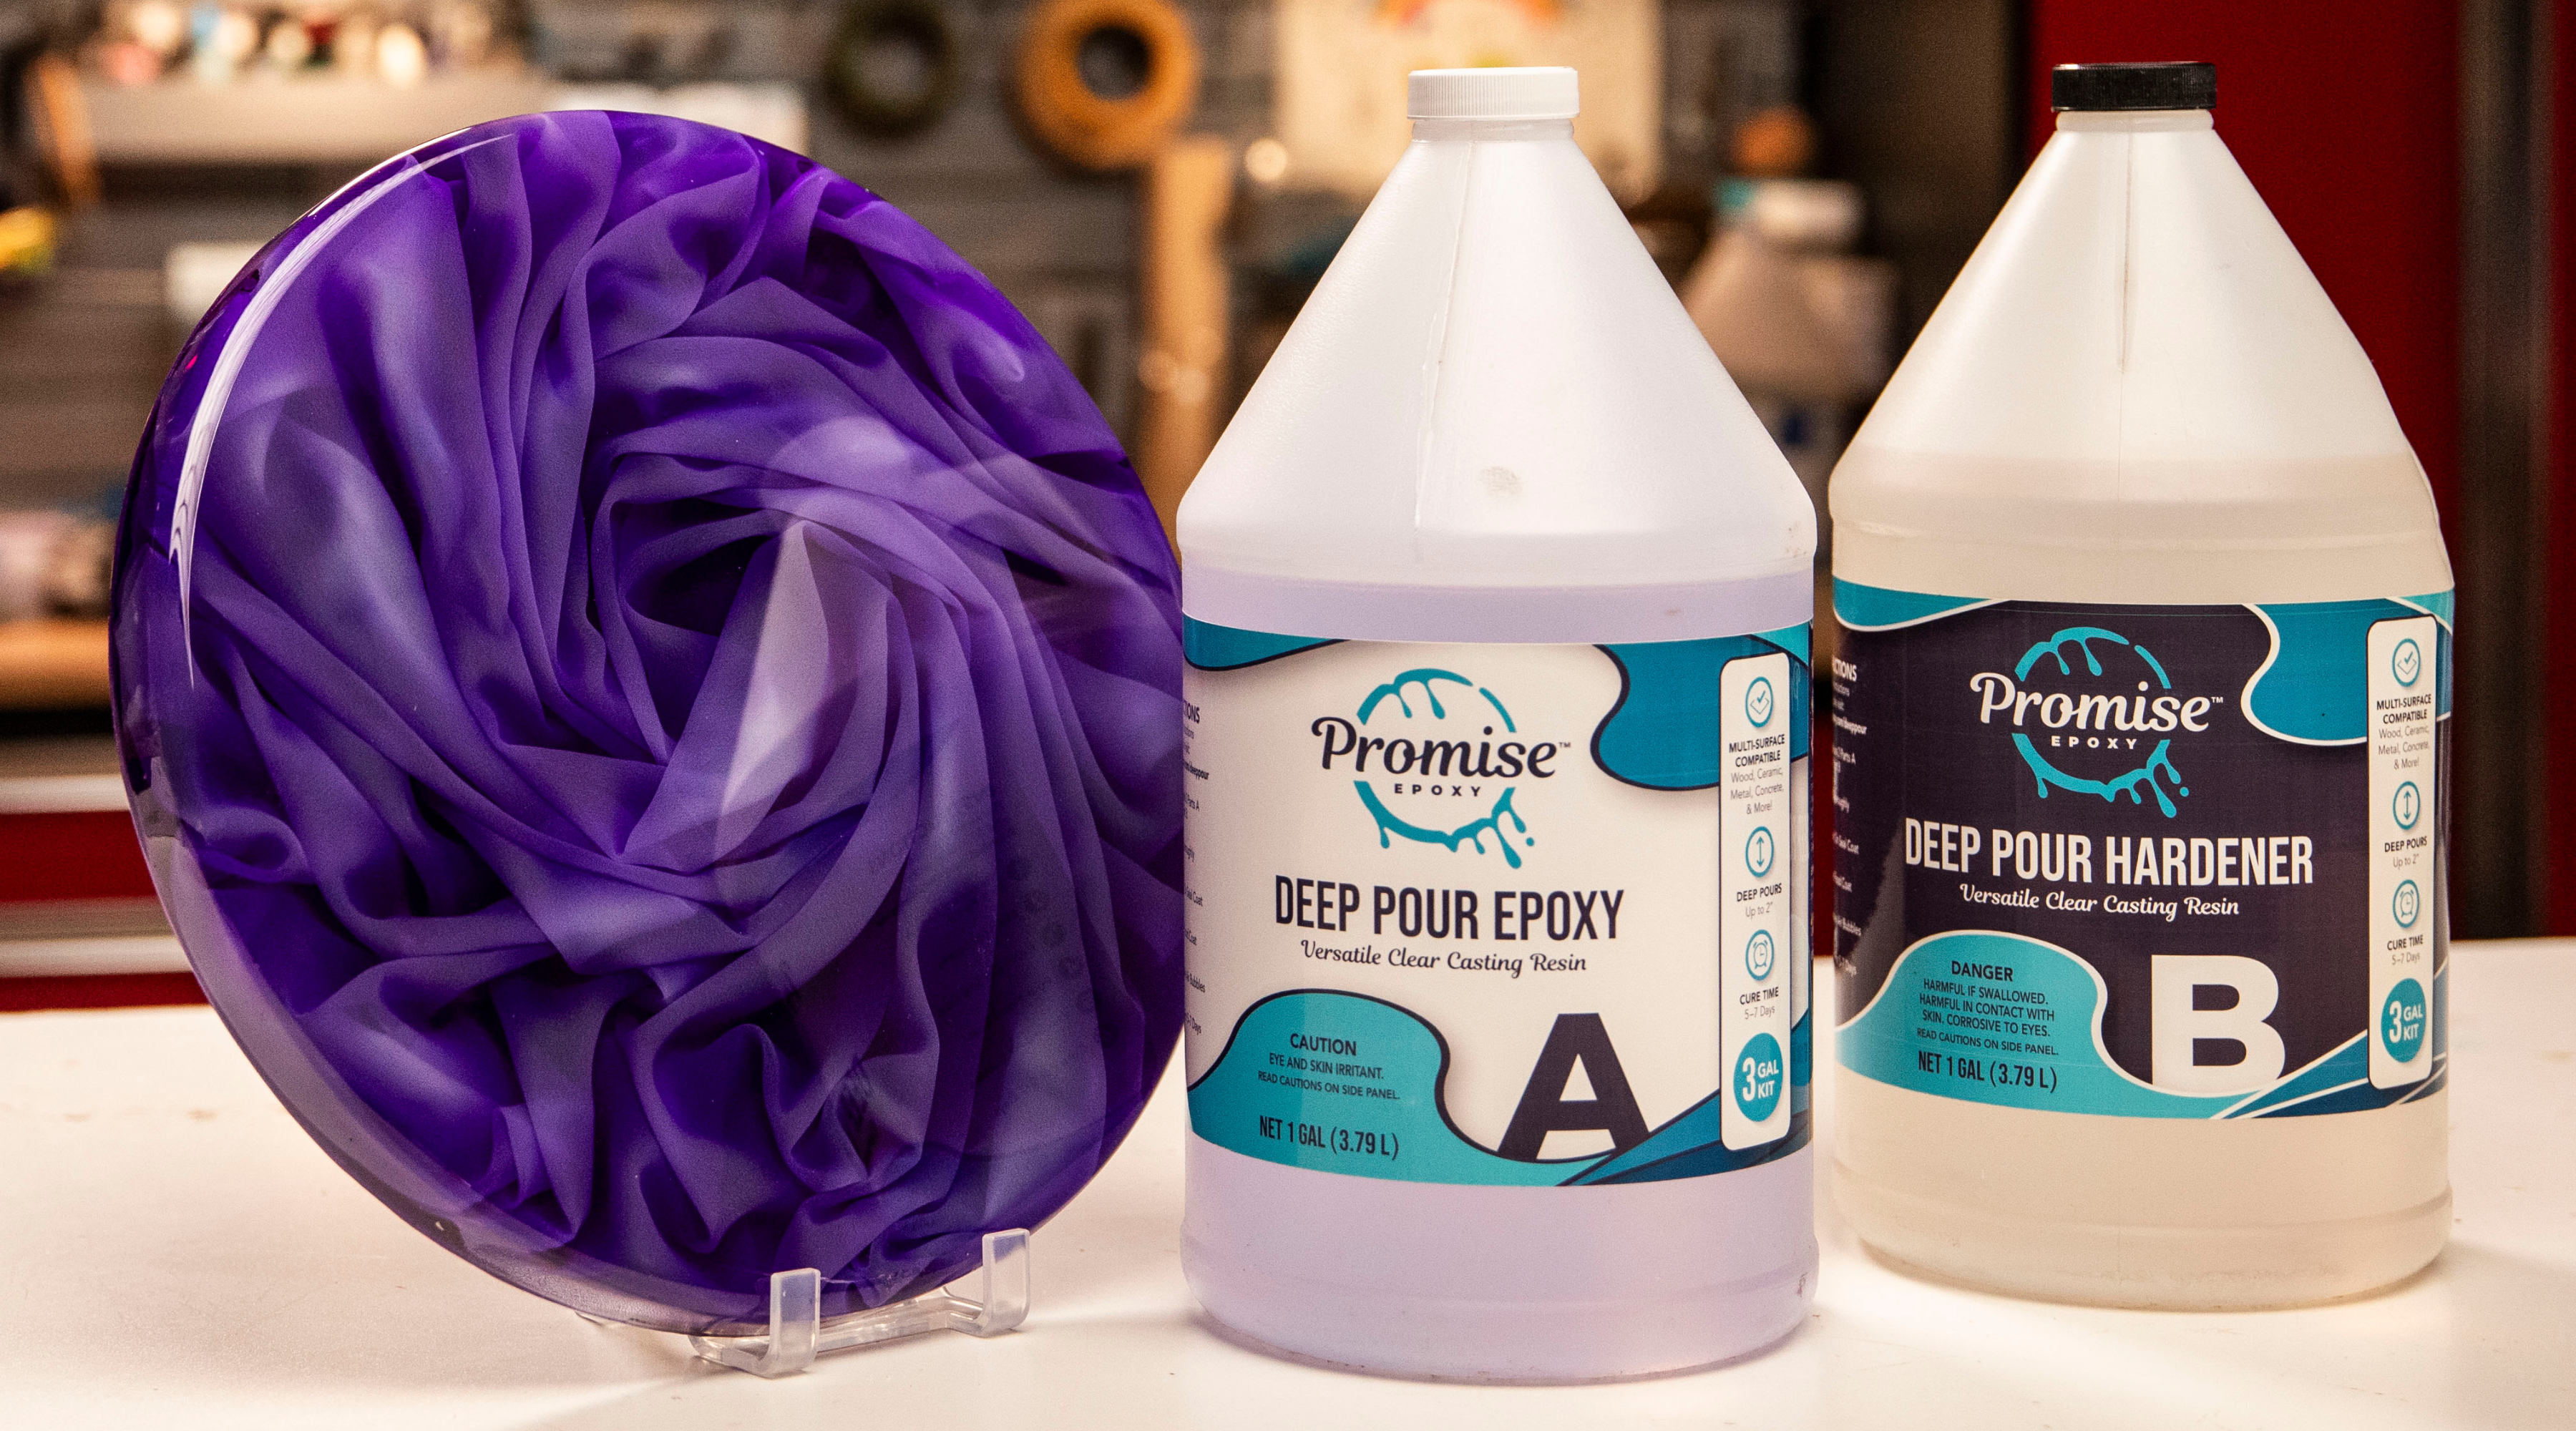 chiffon fabric encapsulation in deep pour epoxy with a purple tint round propped up on a white table next to two bottles of Promise Deep Pour Epoxy